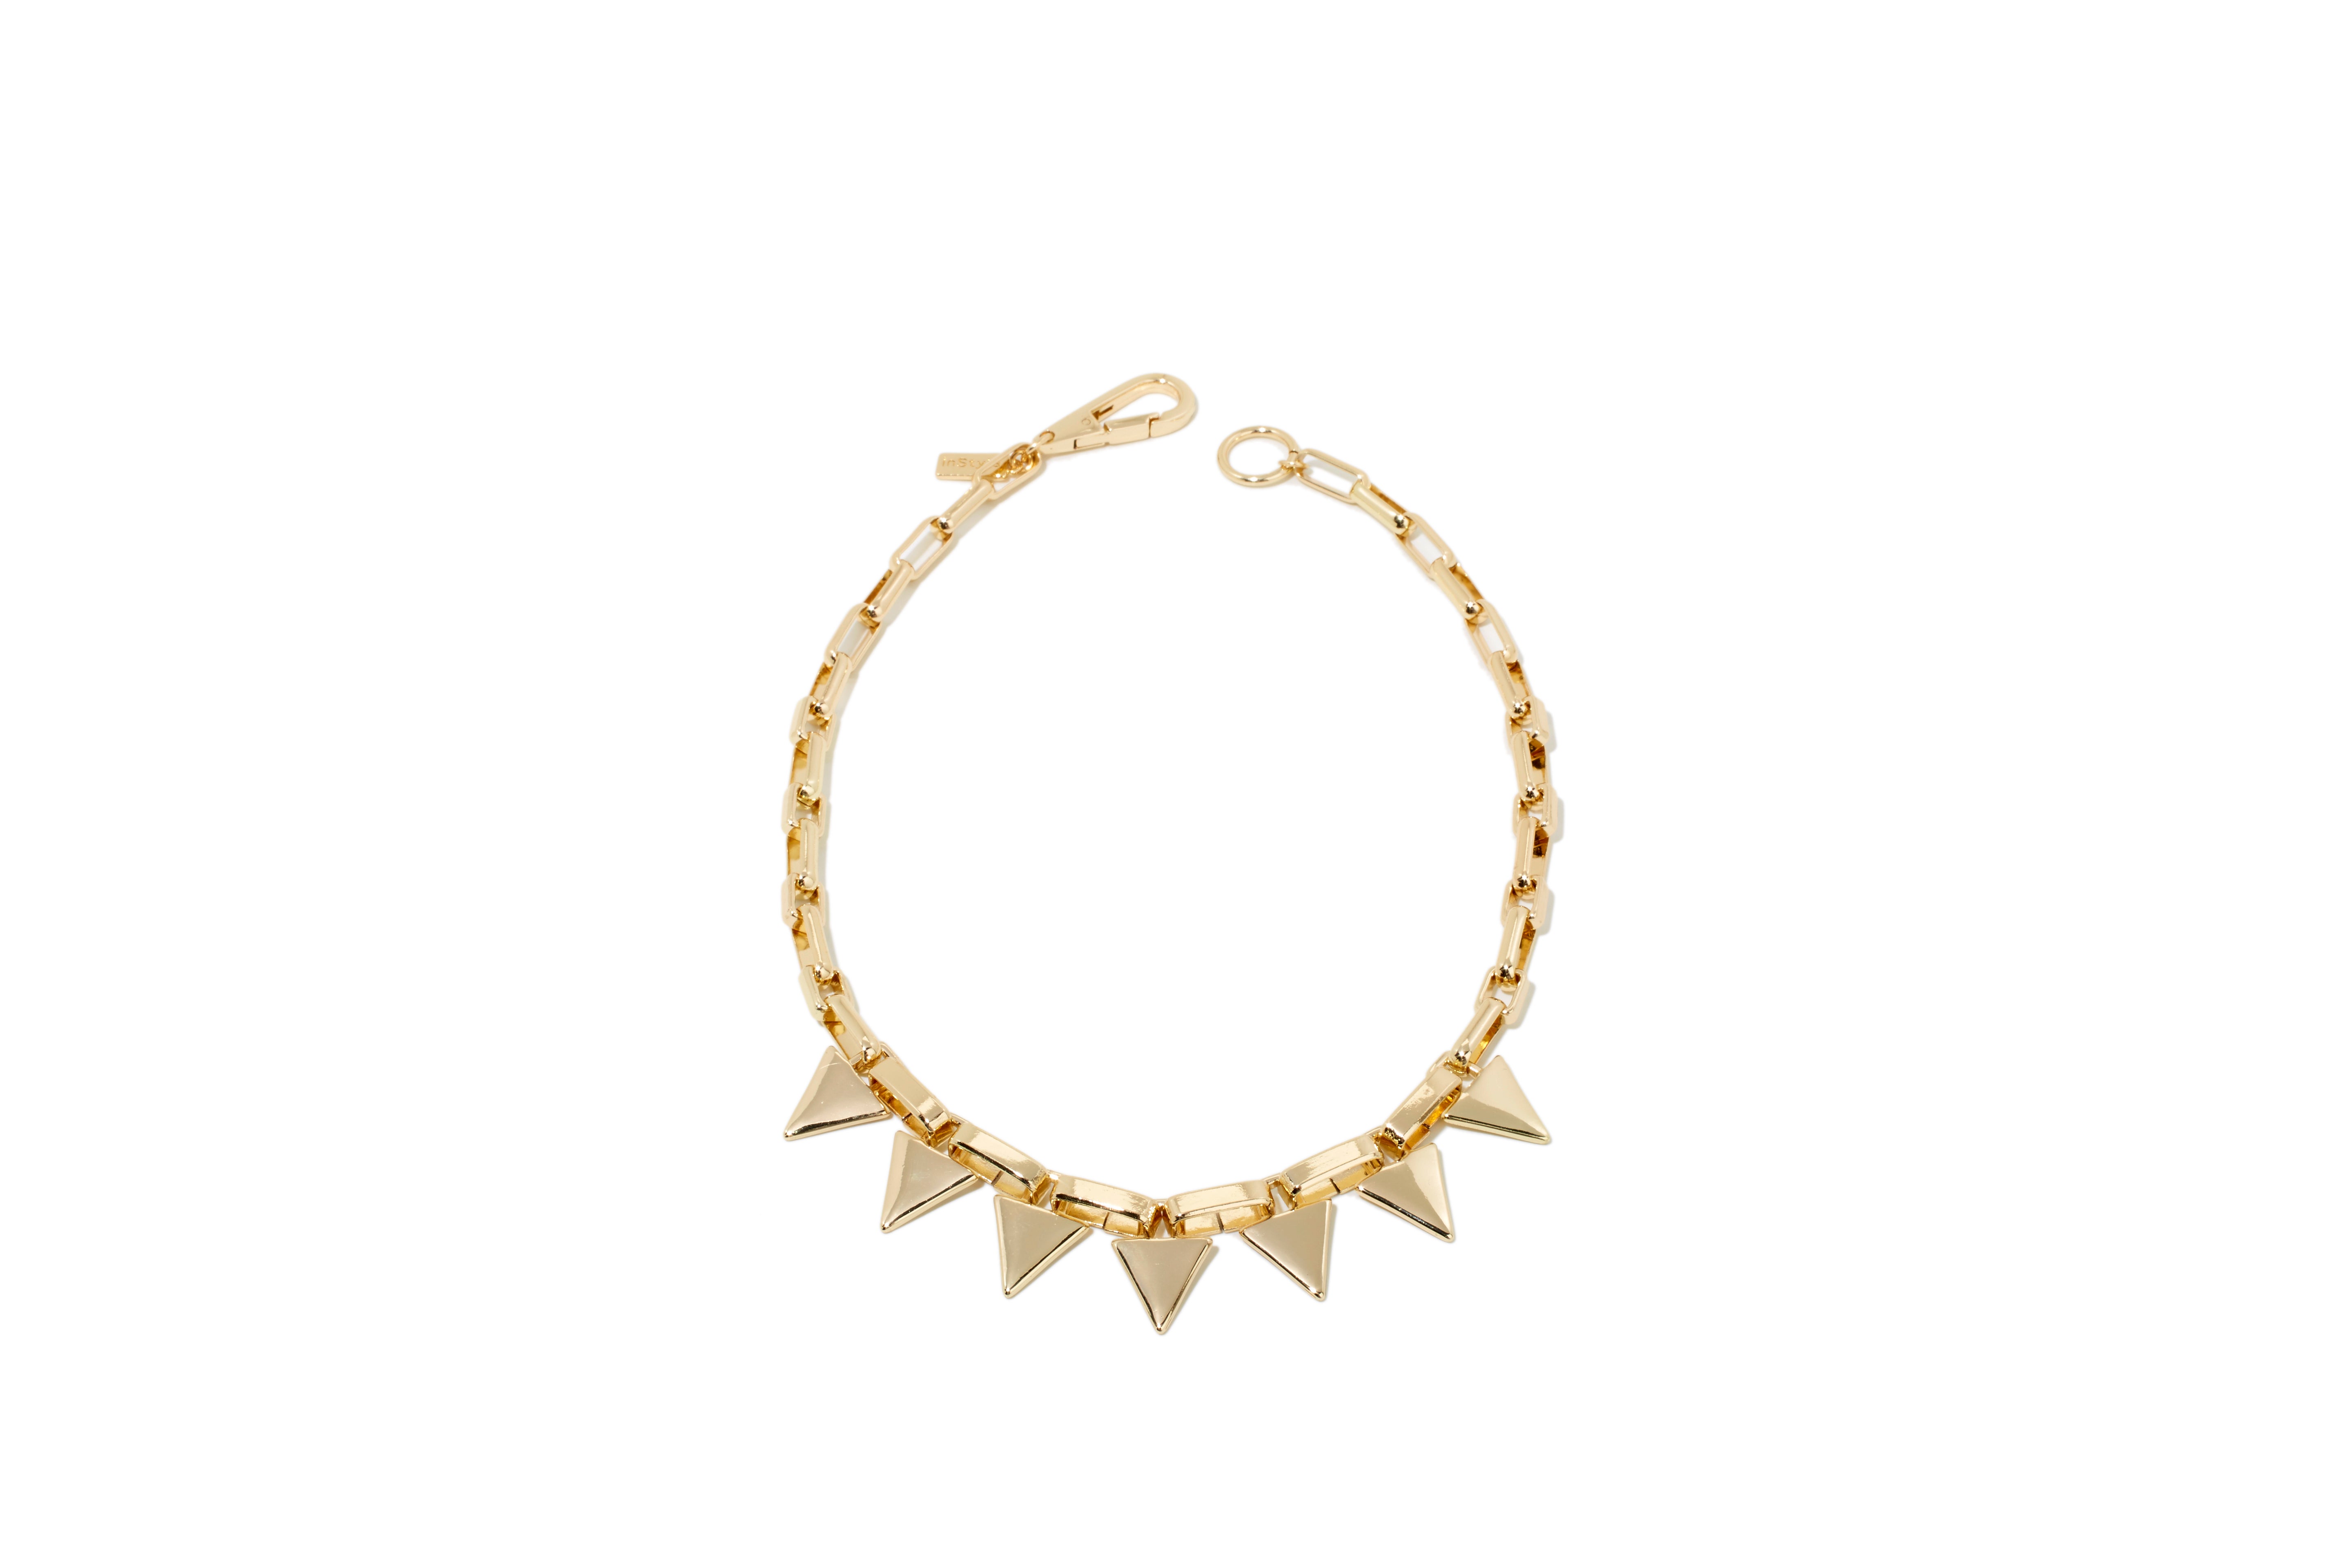 Things We Love: ESSENCE Editors Share Their Favorite Items From The Instyle x HSN Jewelry Line